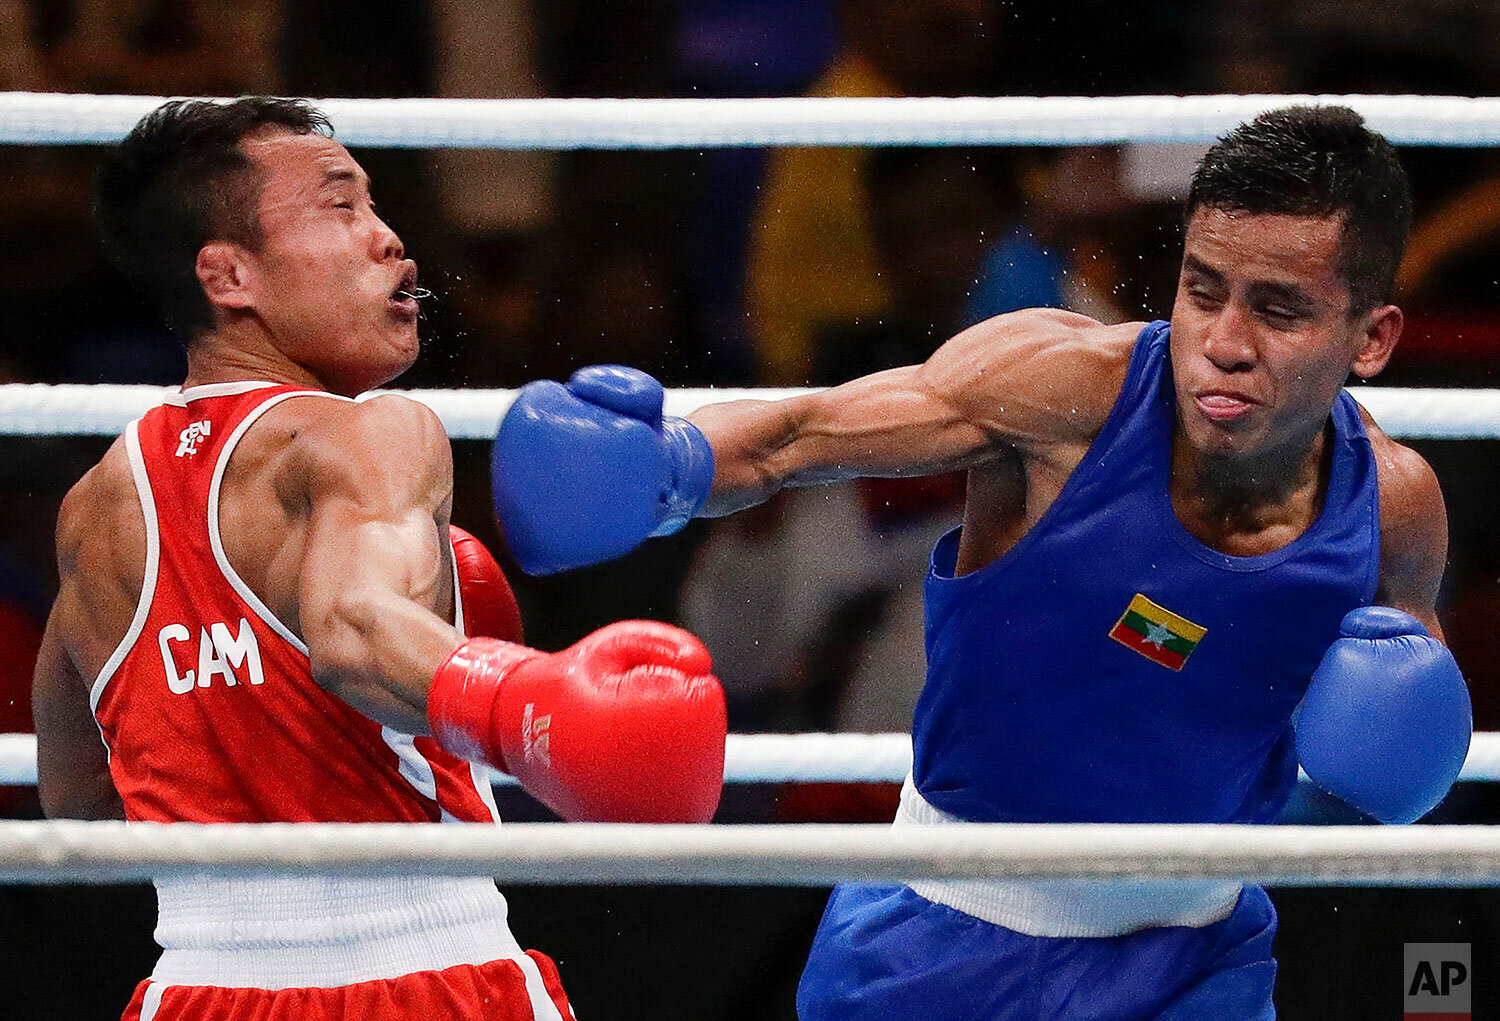  Myanmar’s Latt Naing, right, lands a punch on Cambodia’s Nat Sieknin during their men's bantam weight (56kg) boxing quarterfinals match at the 30th South East Asian Games in Manila, Philippines on Wednesday Dec. 4, 2019. MyanmarÅfs Naing won the mat